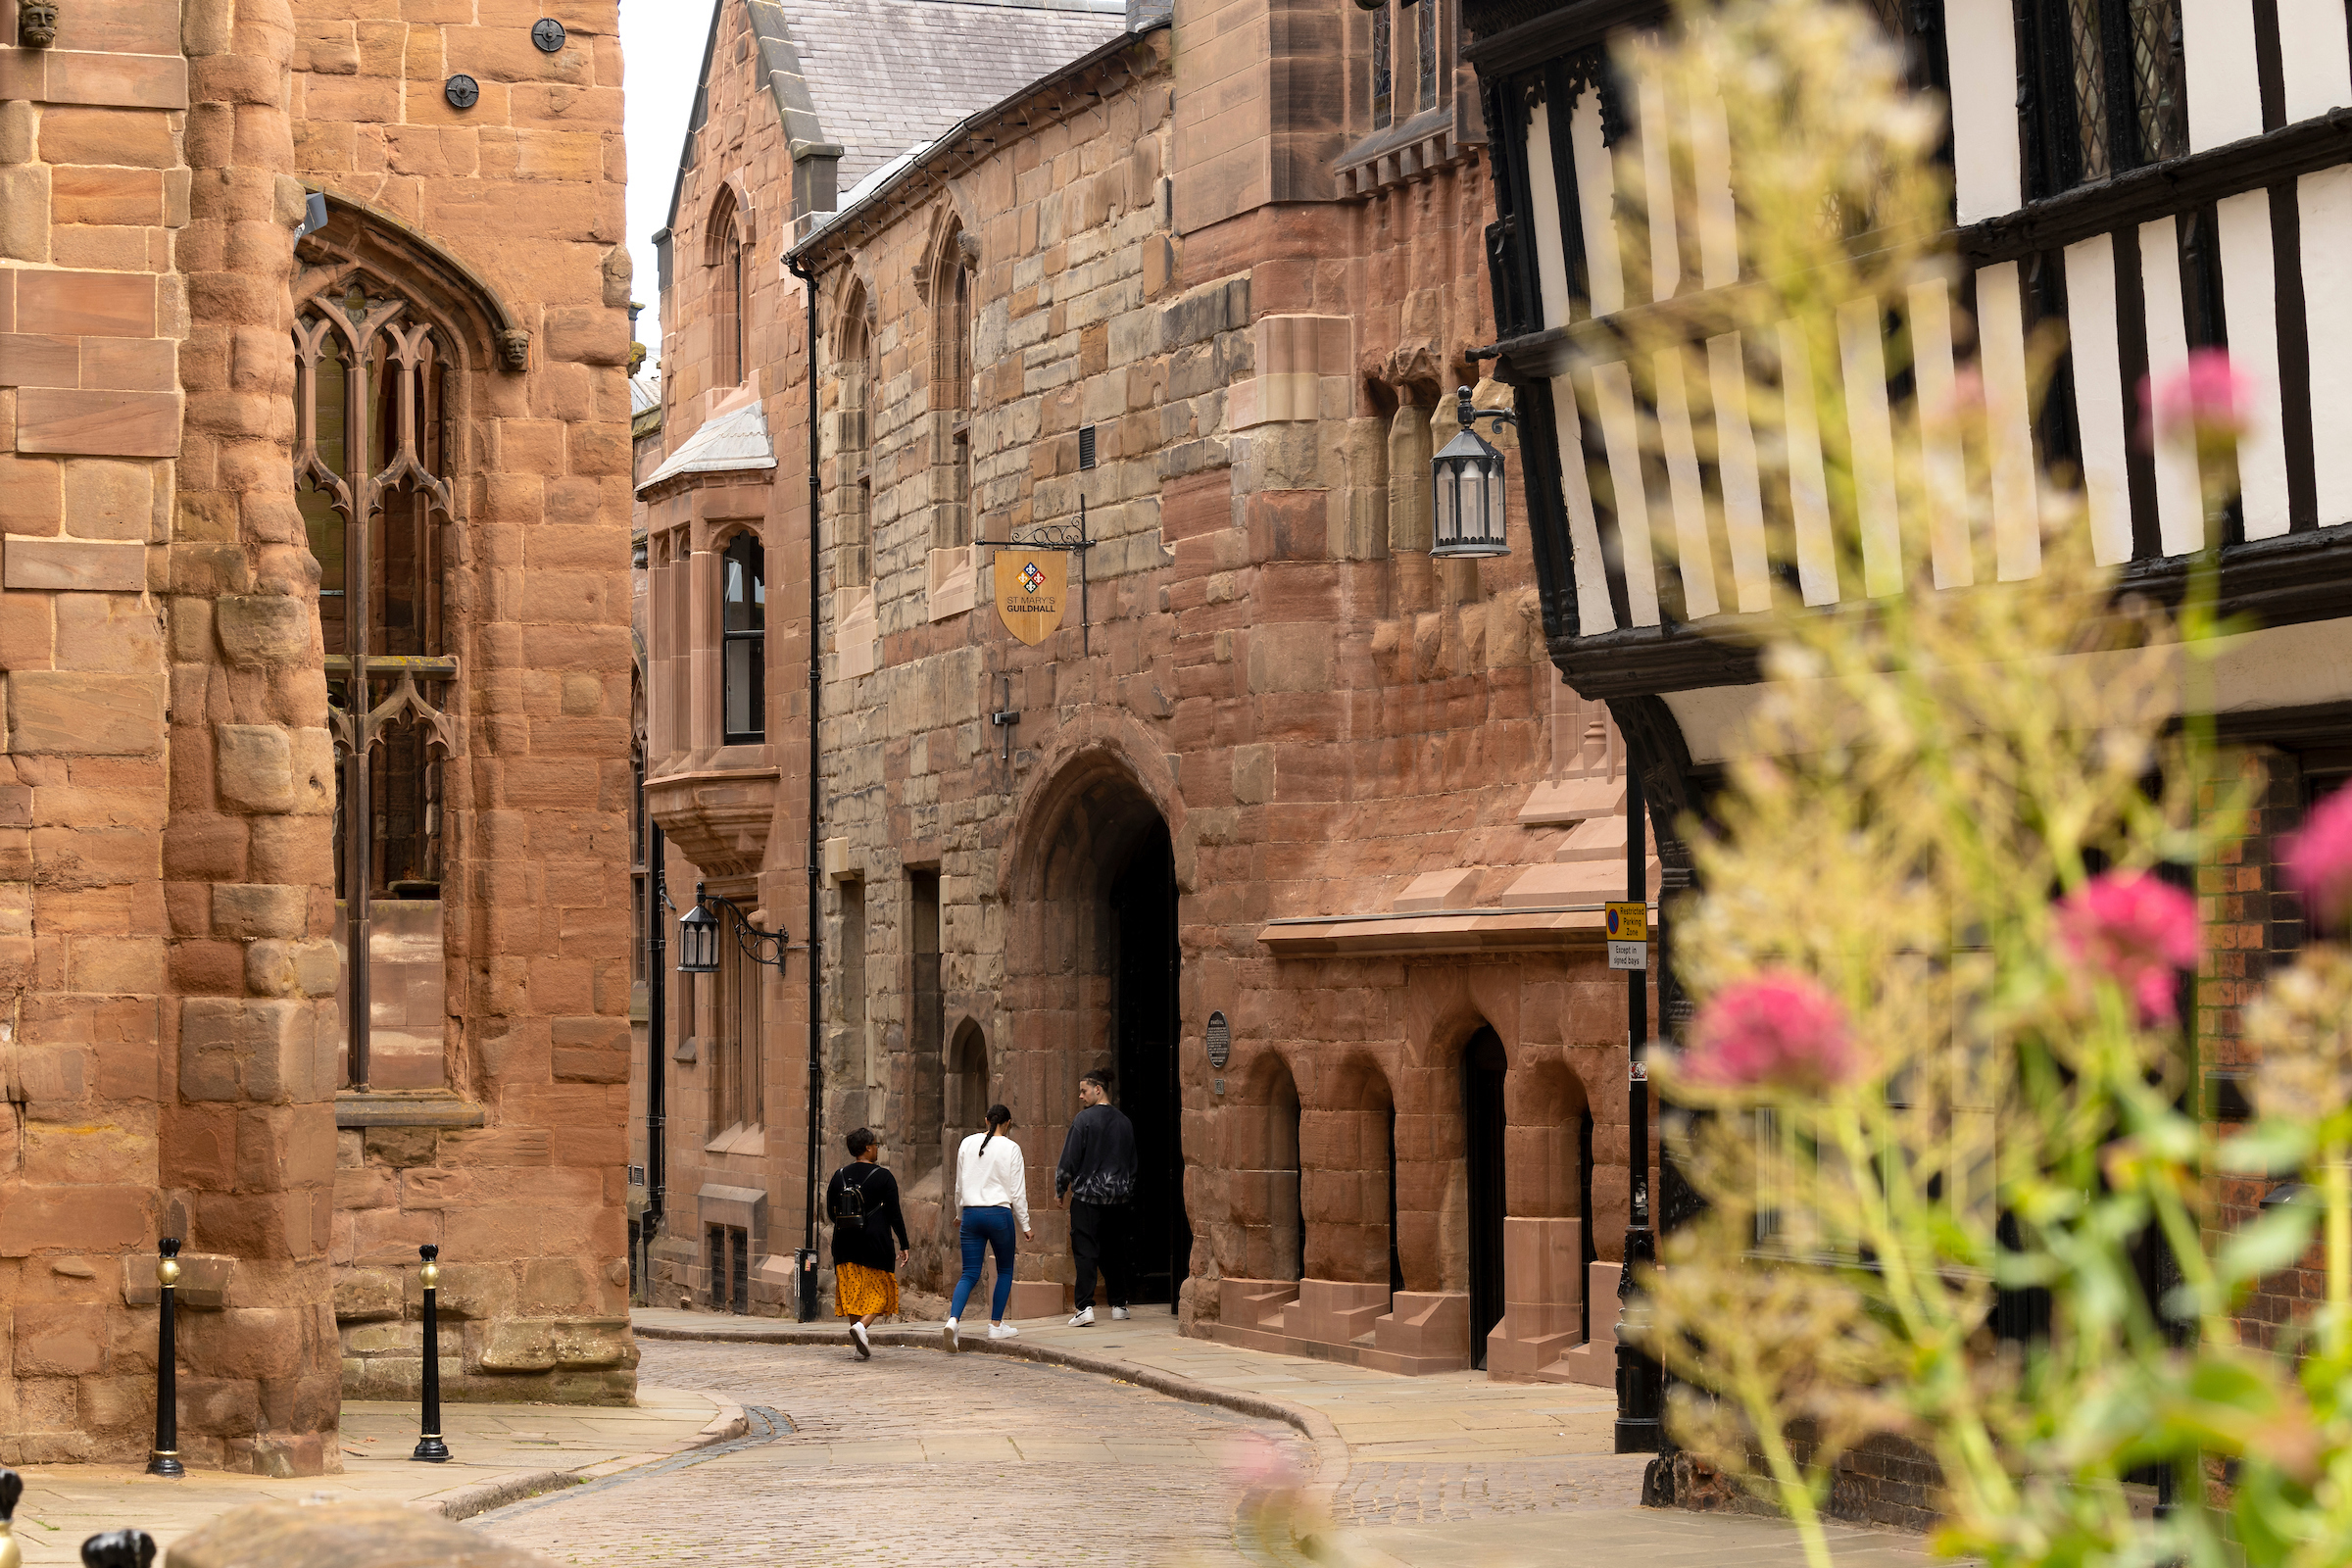 Attractions in Coventry's 'cathedral quarter' join forces to bring more visitors to city